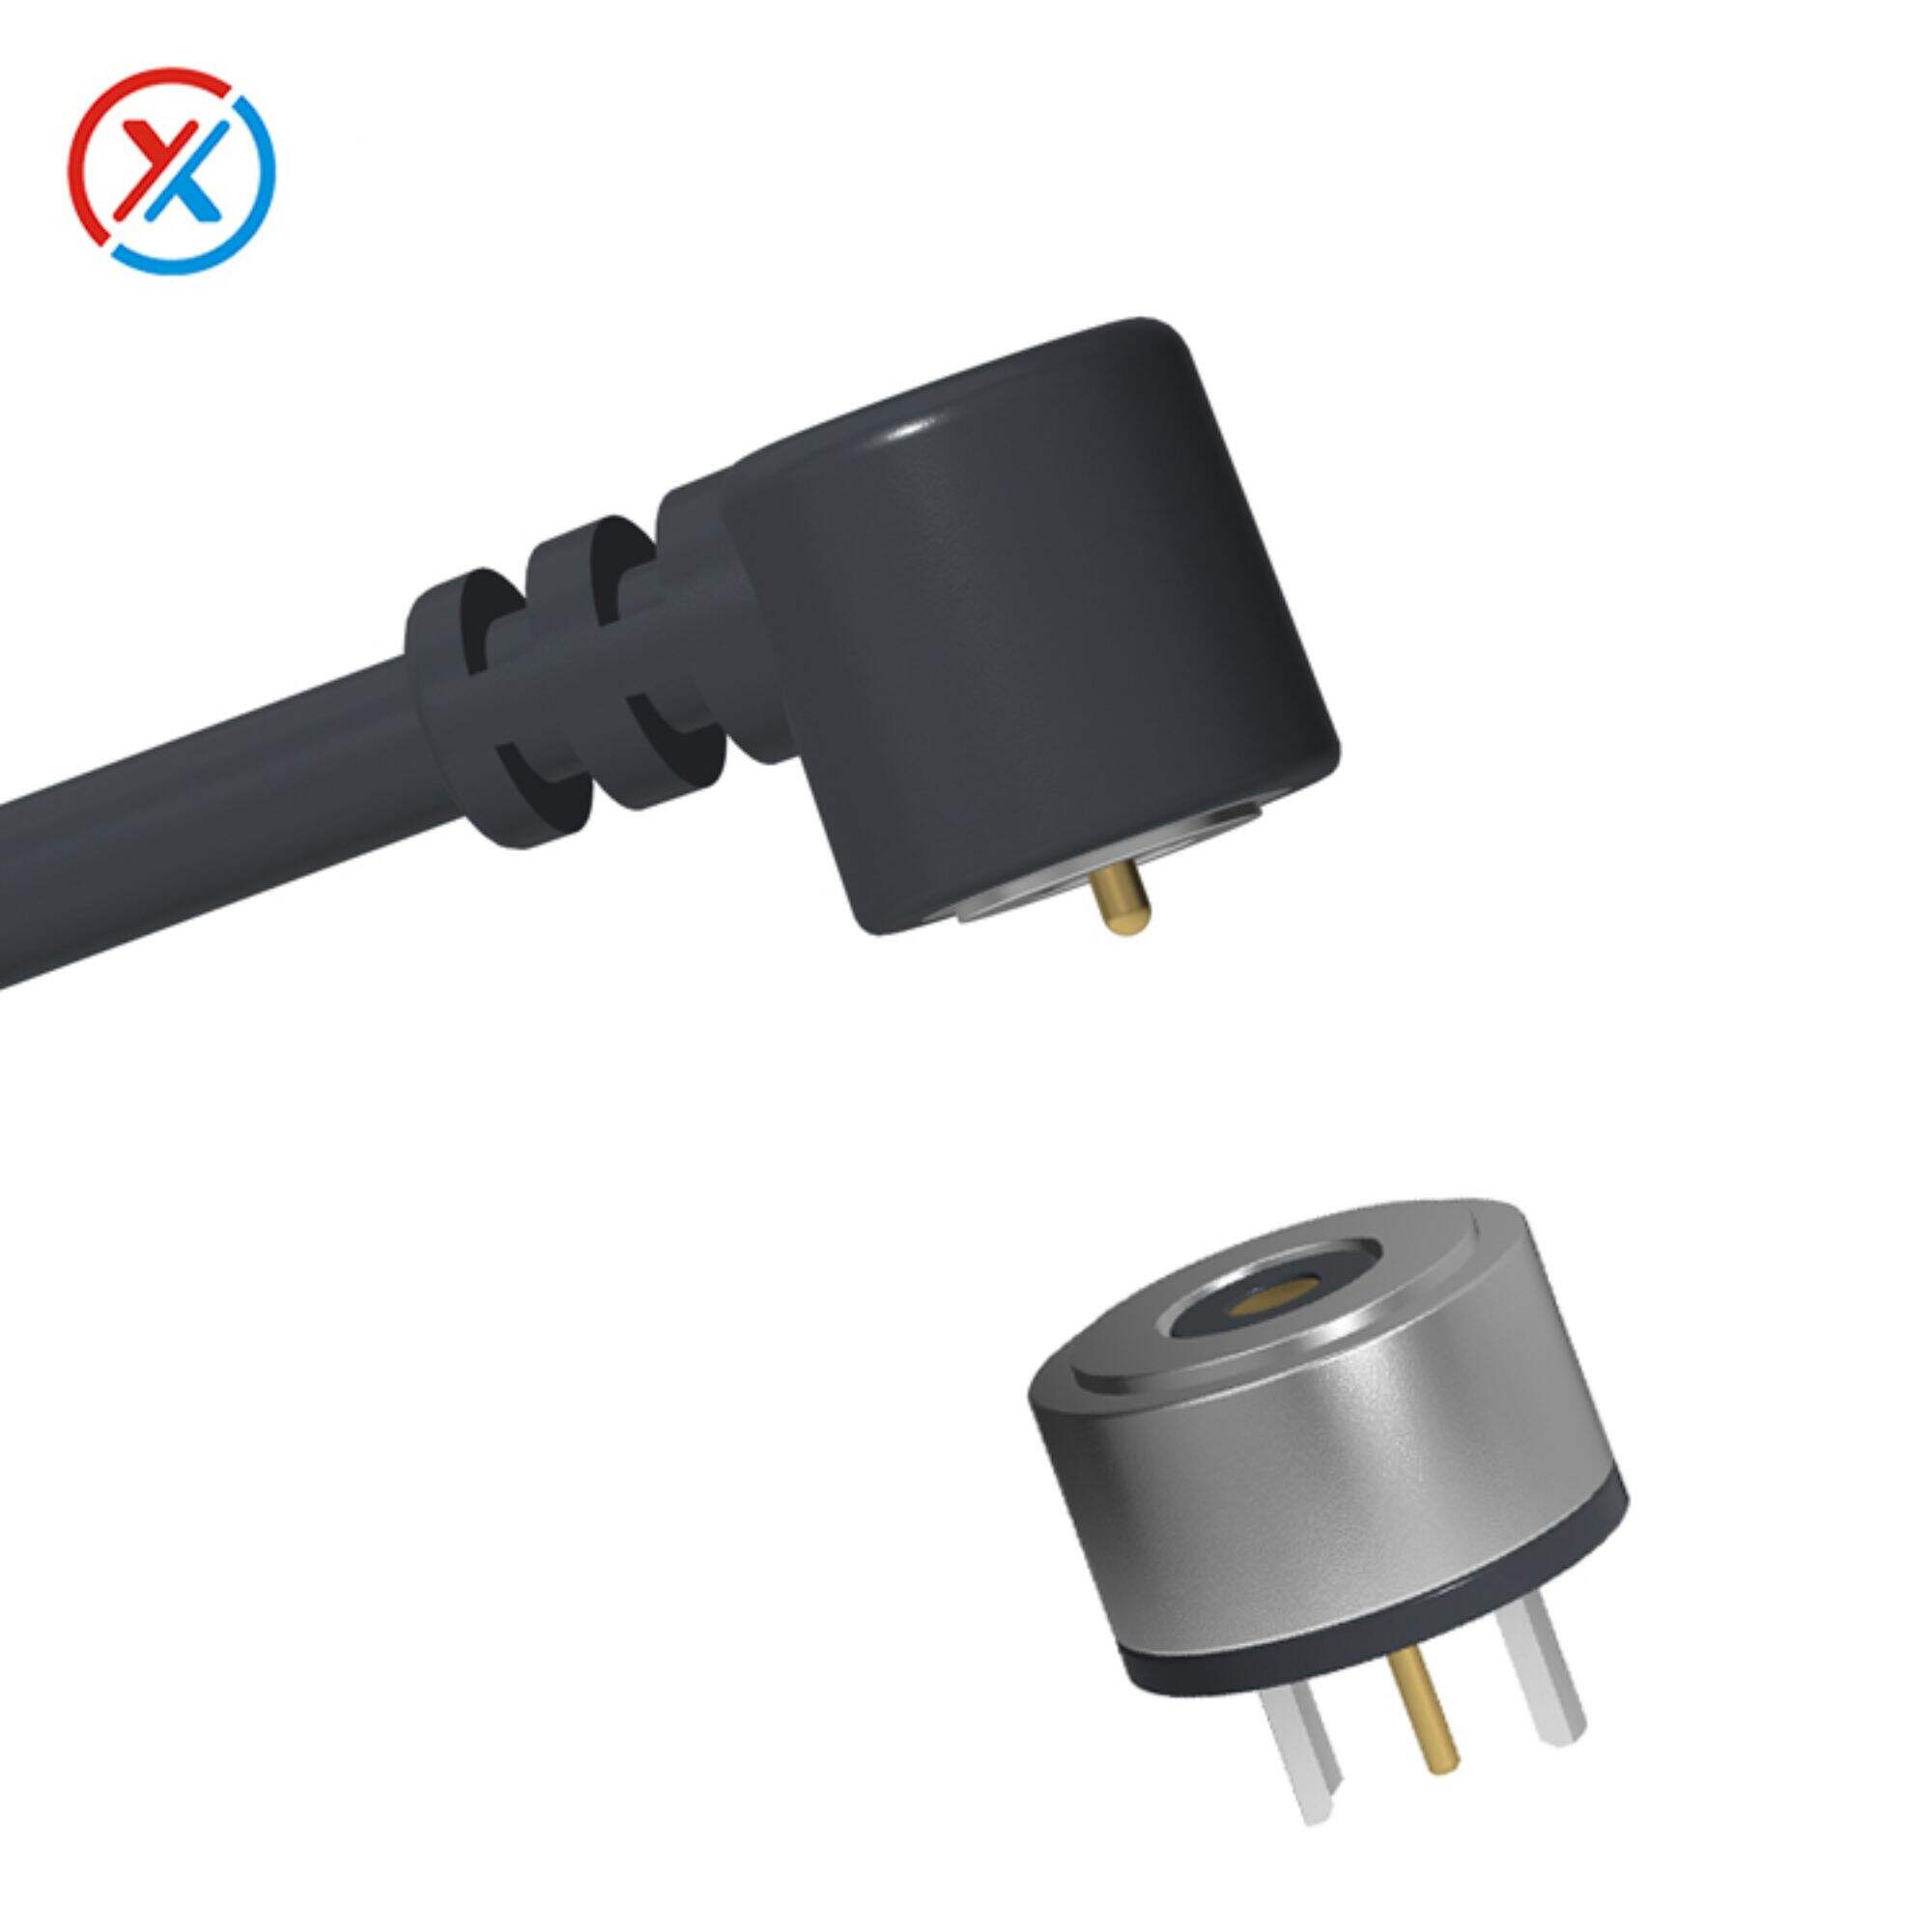 Cost-effective round PO GOPIN magnetic charging cable holder